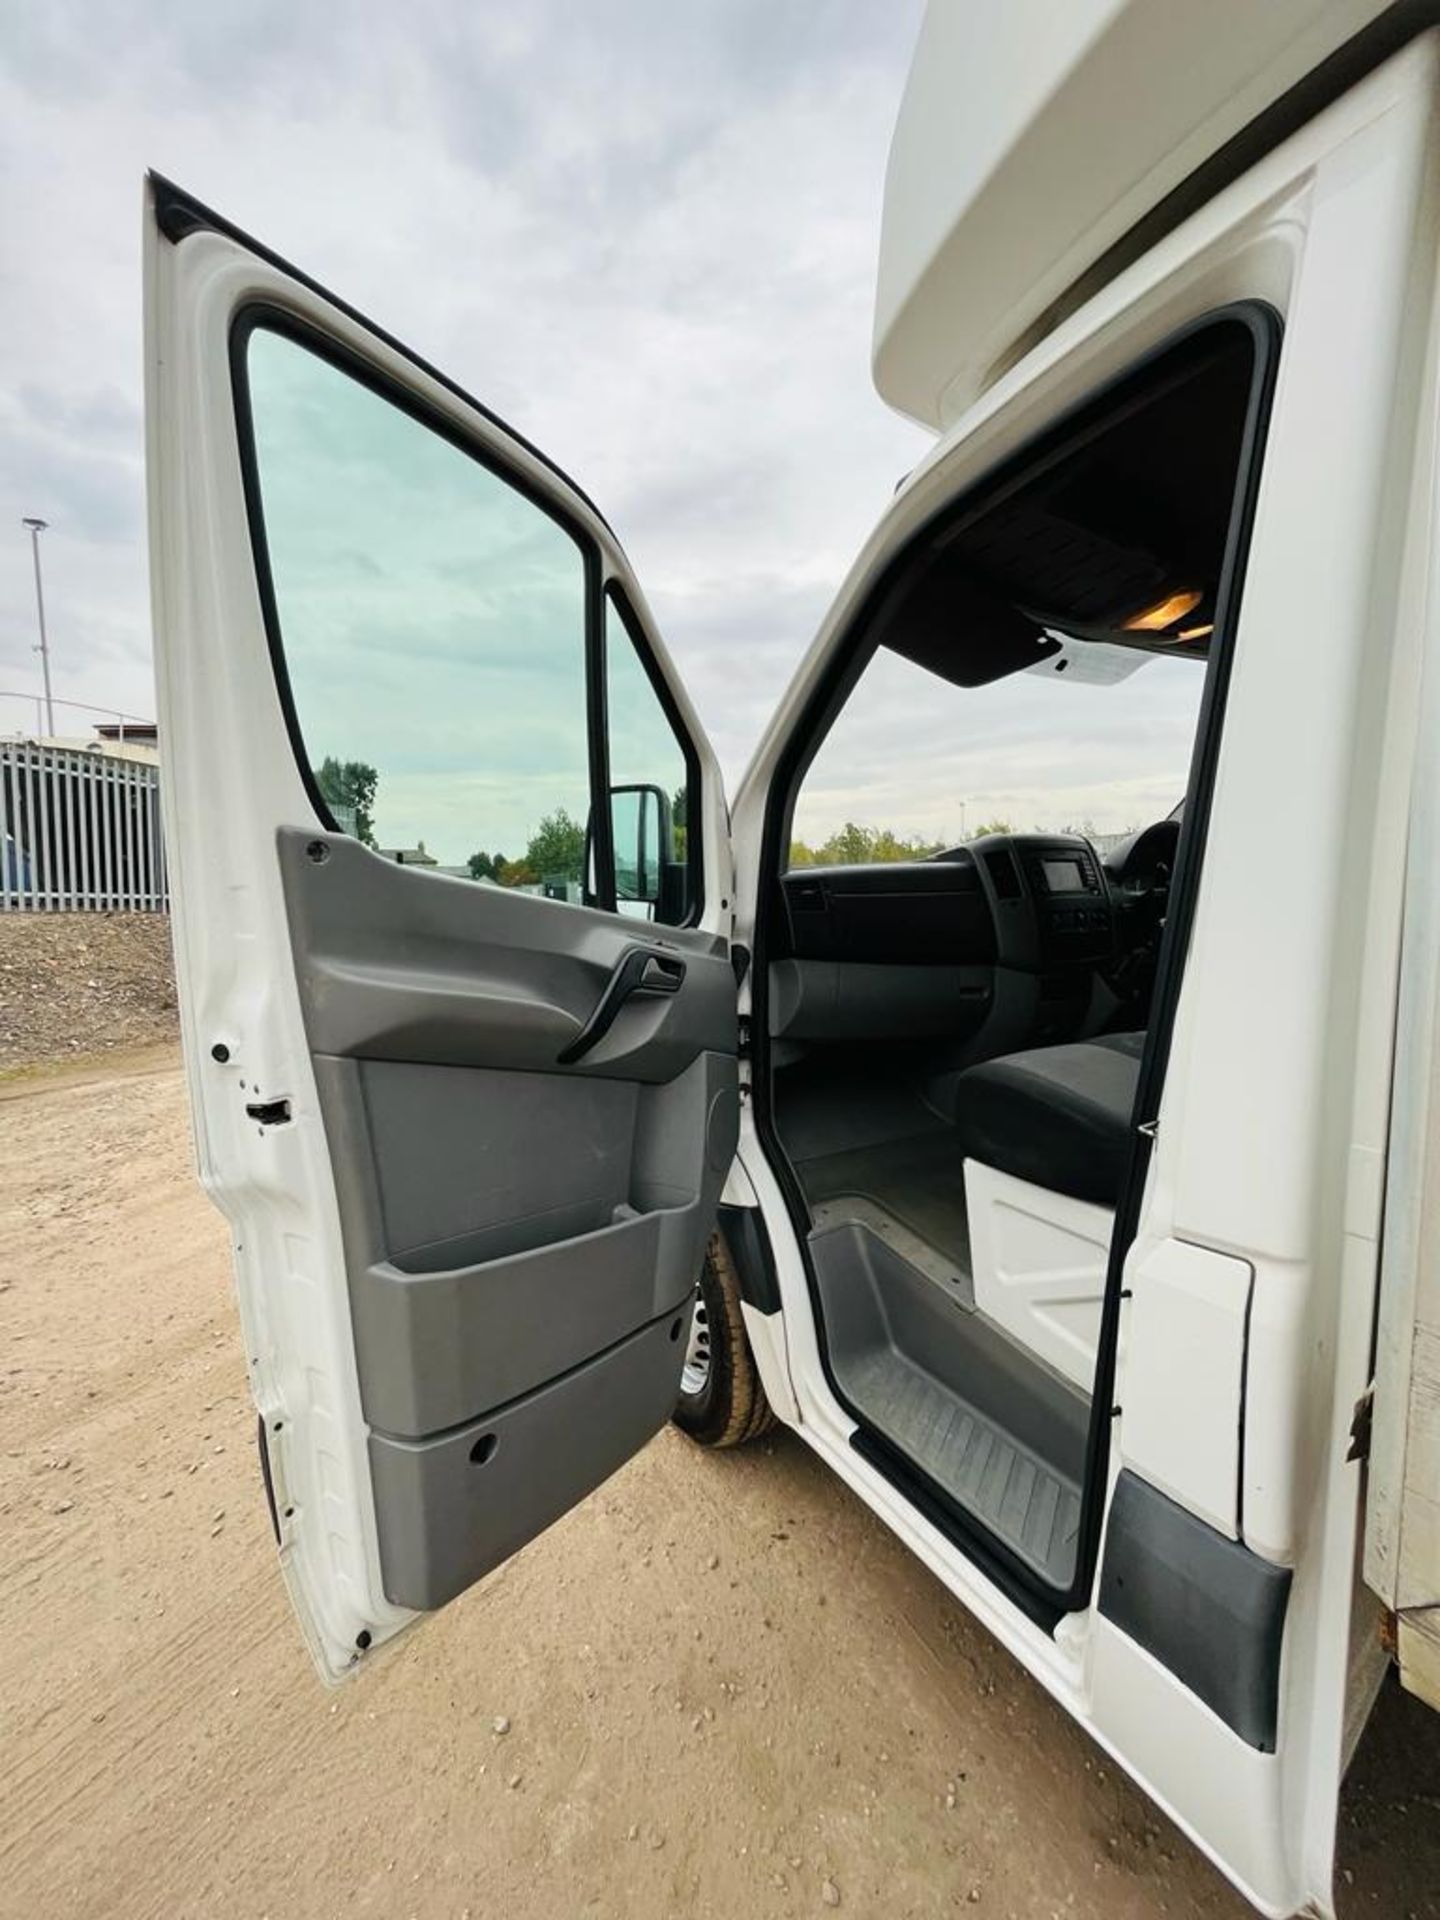 ** ON SALE ** Volkswagen Crafter 35 2.0 TDI 136 LWB 2015 (64 Reg) - Luton Body - Tail Lift - Image 21 of 26